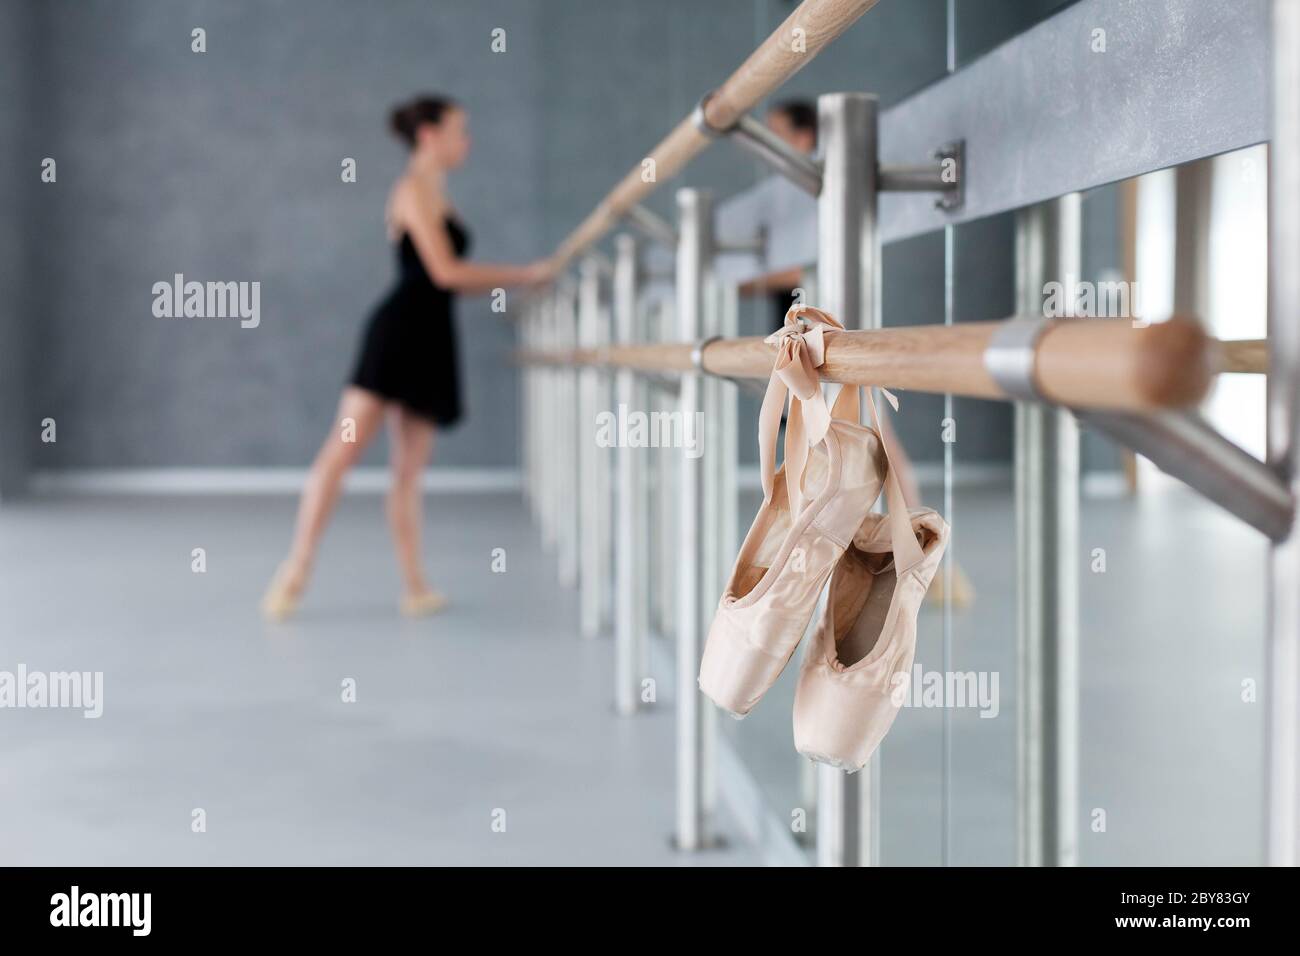 Blurred Background With Ballerina Doing Exercises Pointe Shoes Hang On Ballet Barre Girl Has Dance Workout Stock Photo Alamy